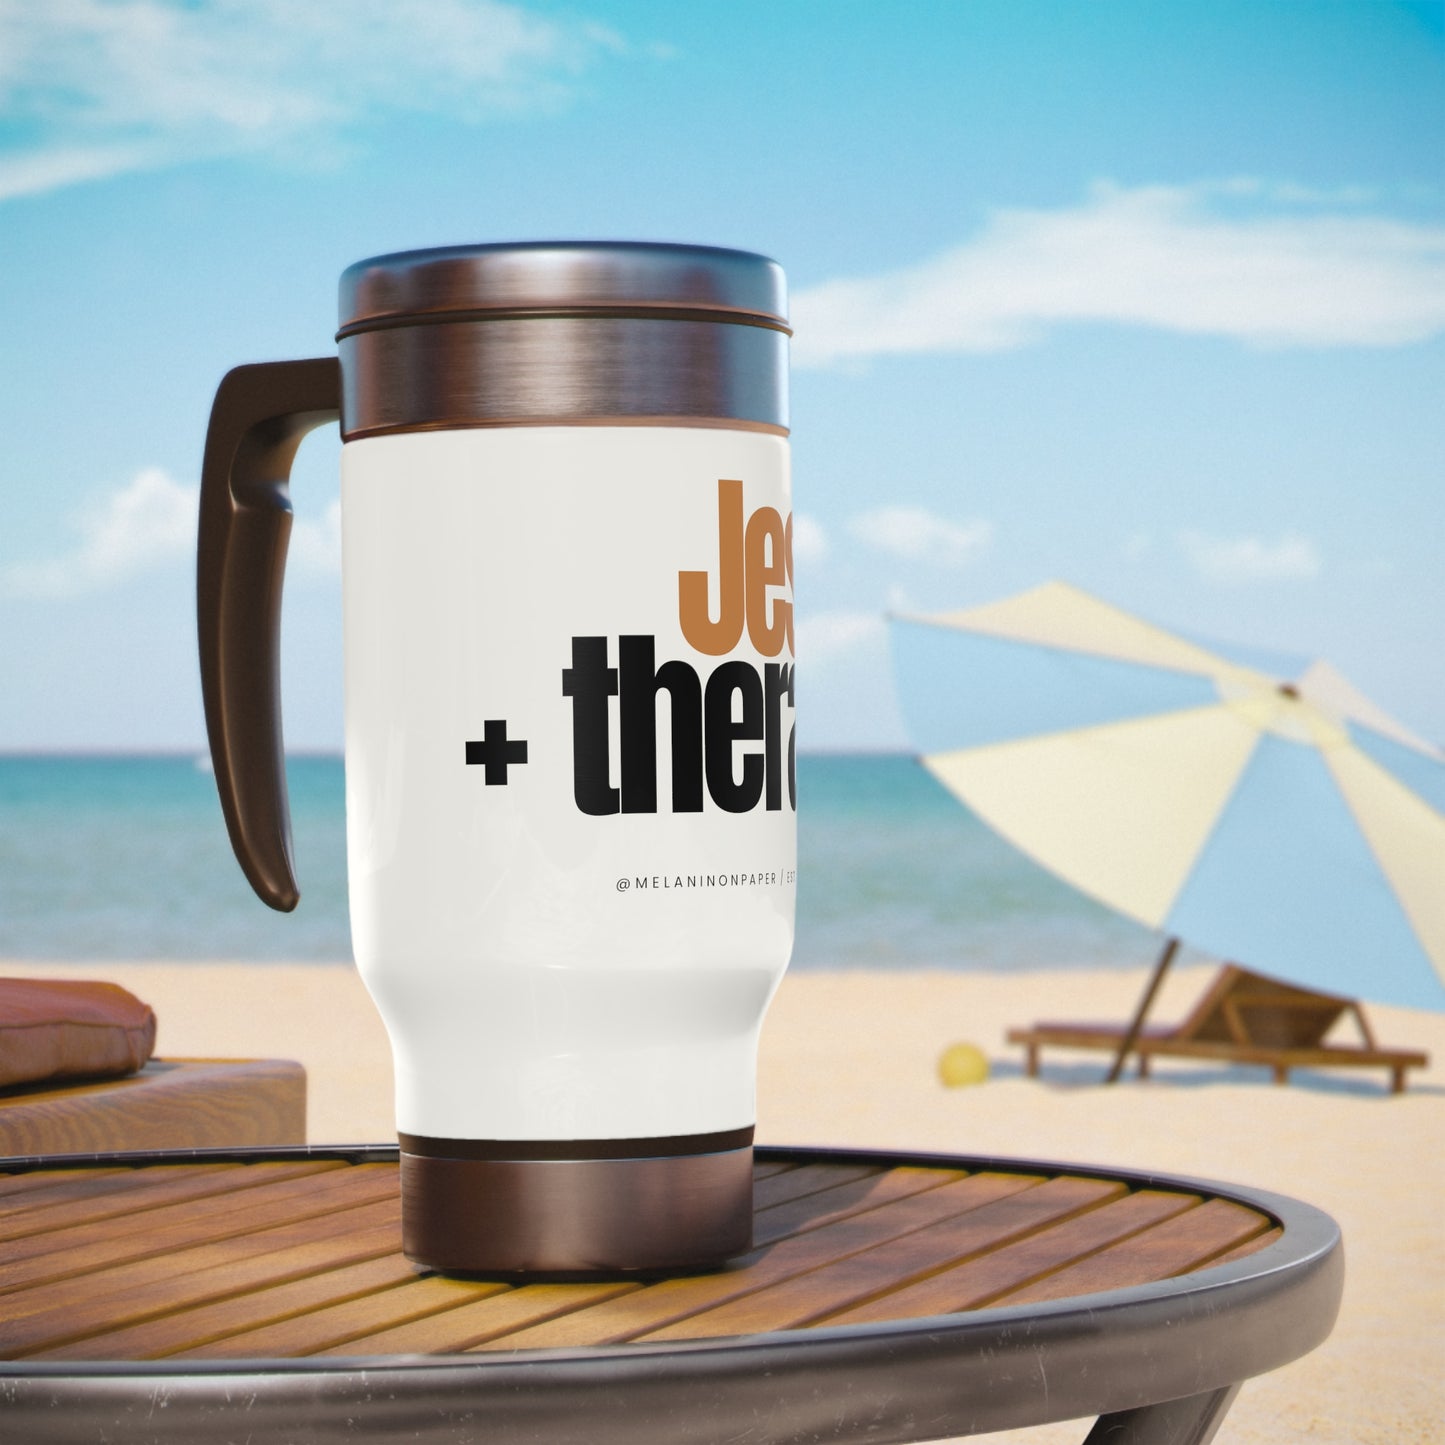 "Jesus + therapy" Stainless Steel Travel Mug with Handle, 14oz